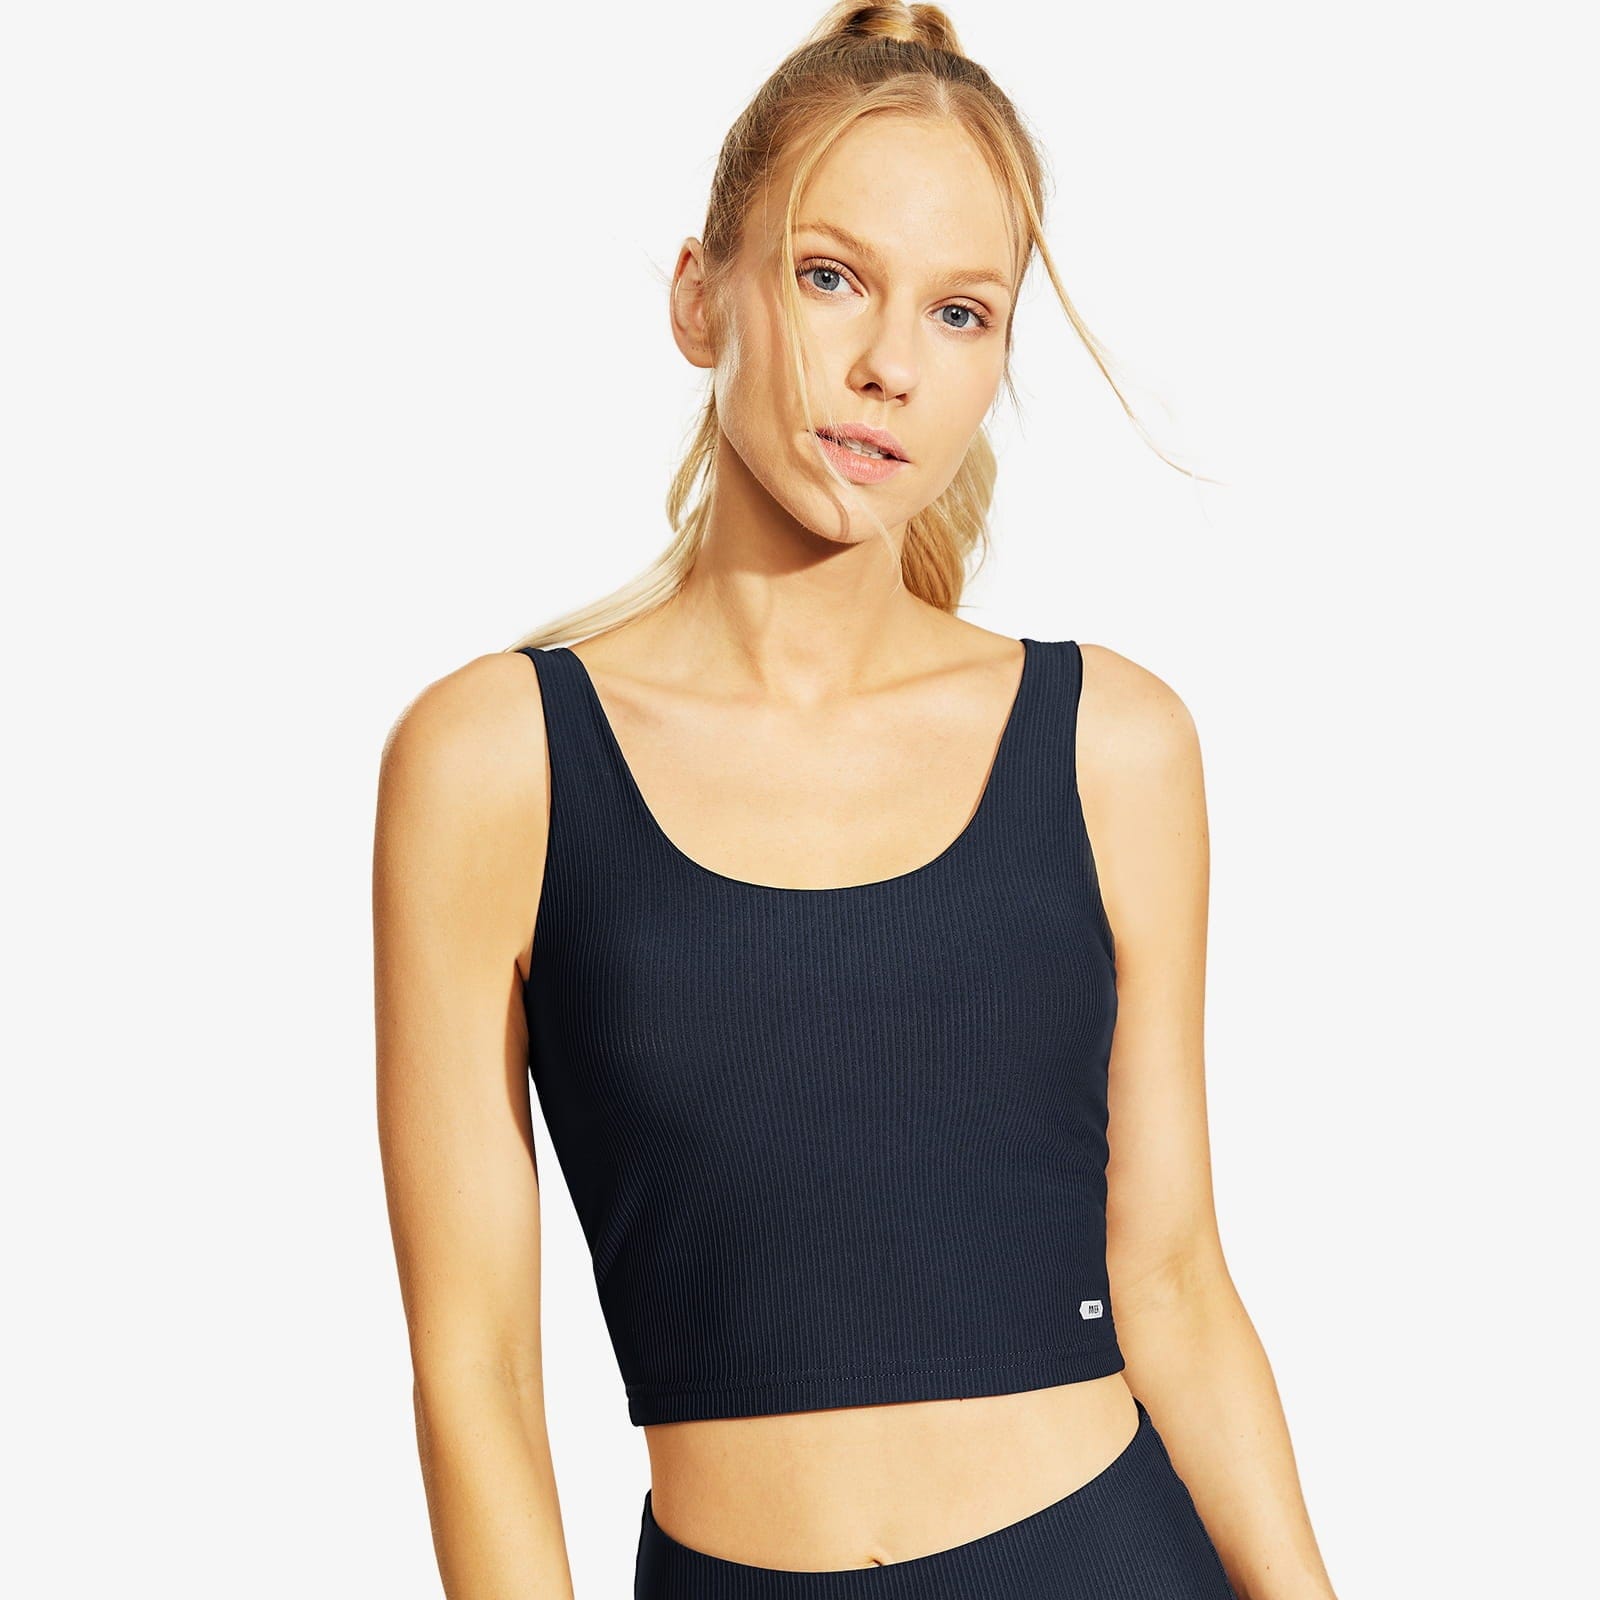 Padded Sports Crop Tops